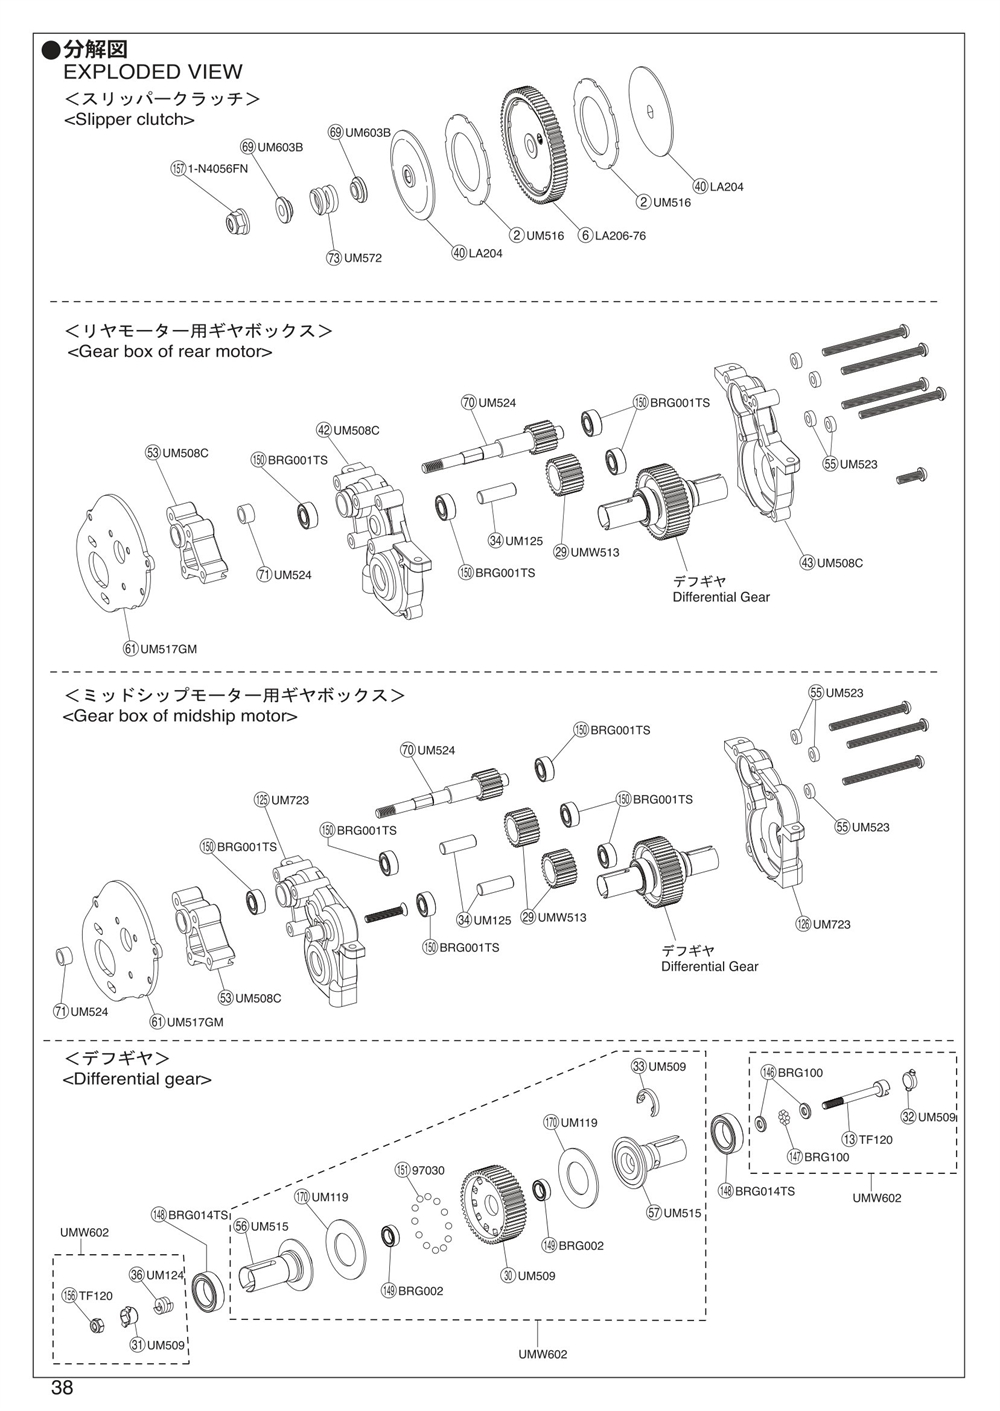 Kyosho - Ultima RB6 - Exploded Views - Page 2